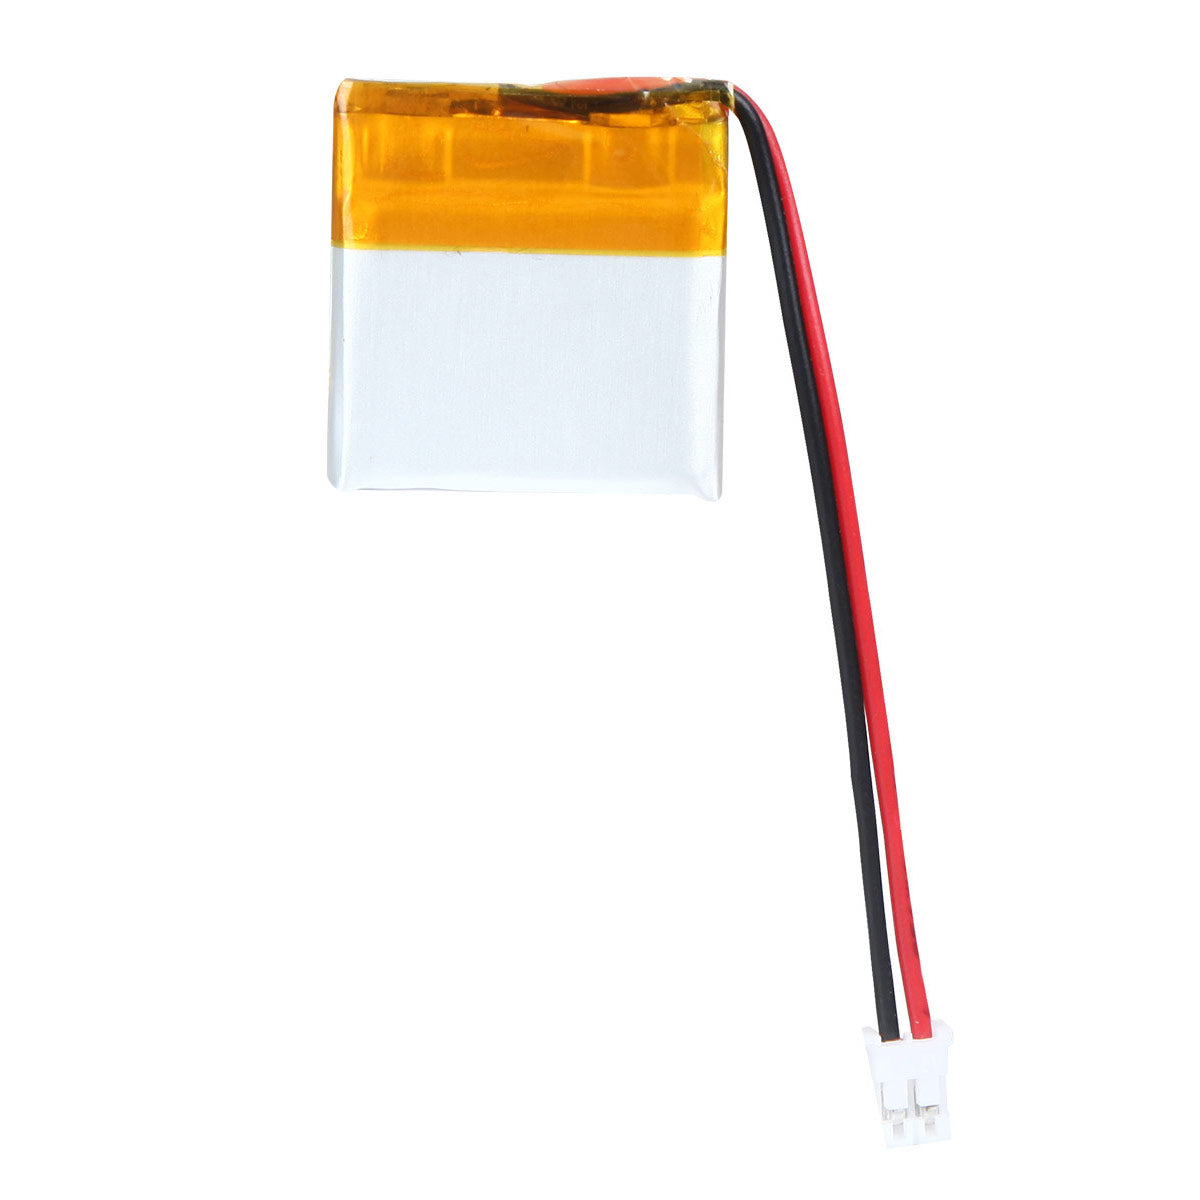 3.7V 70mAh 302020 Rechargeable Lithium Polymer Battery